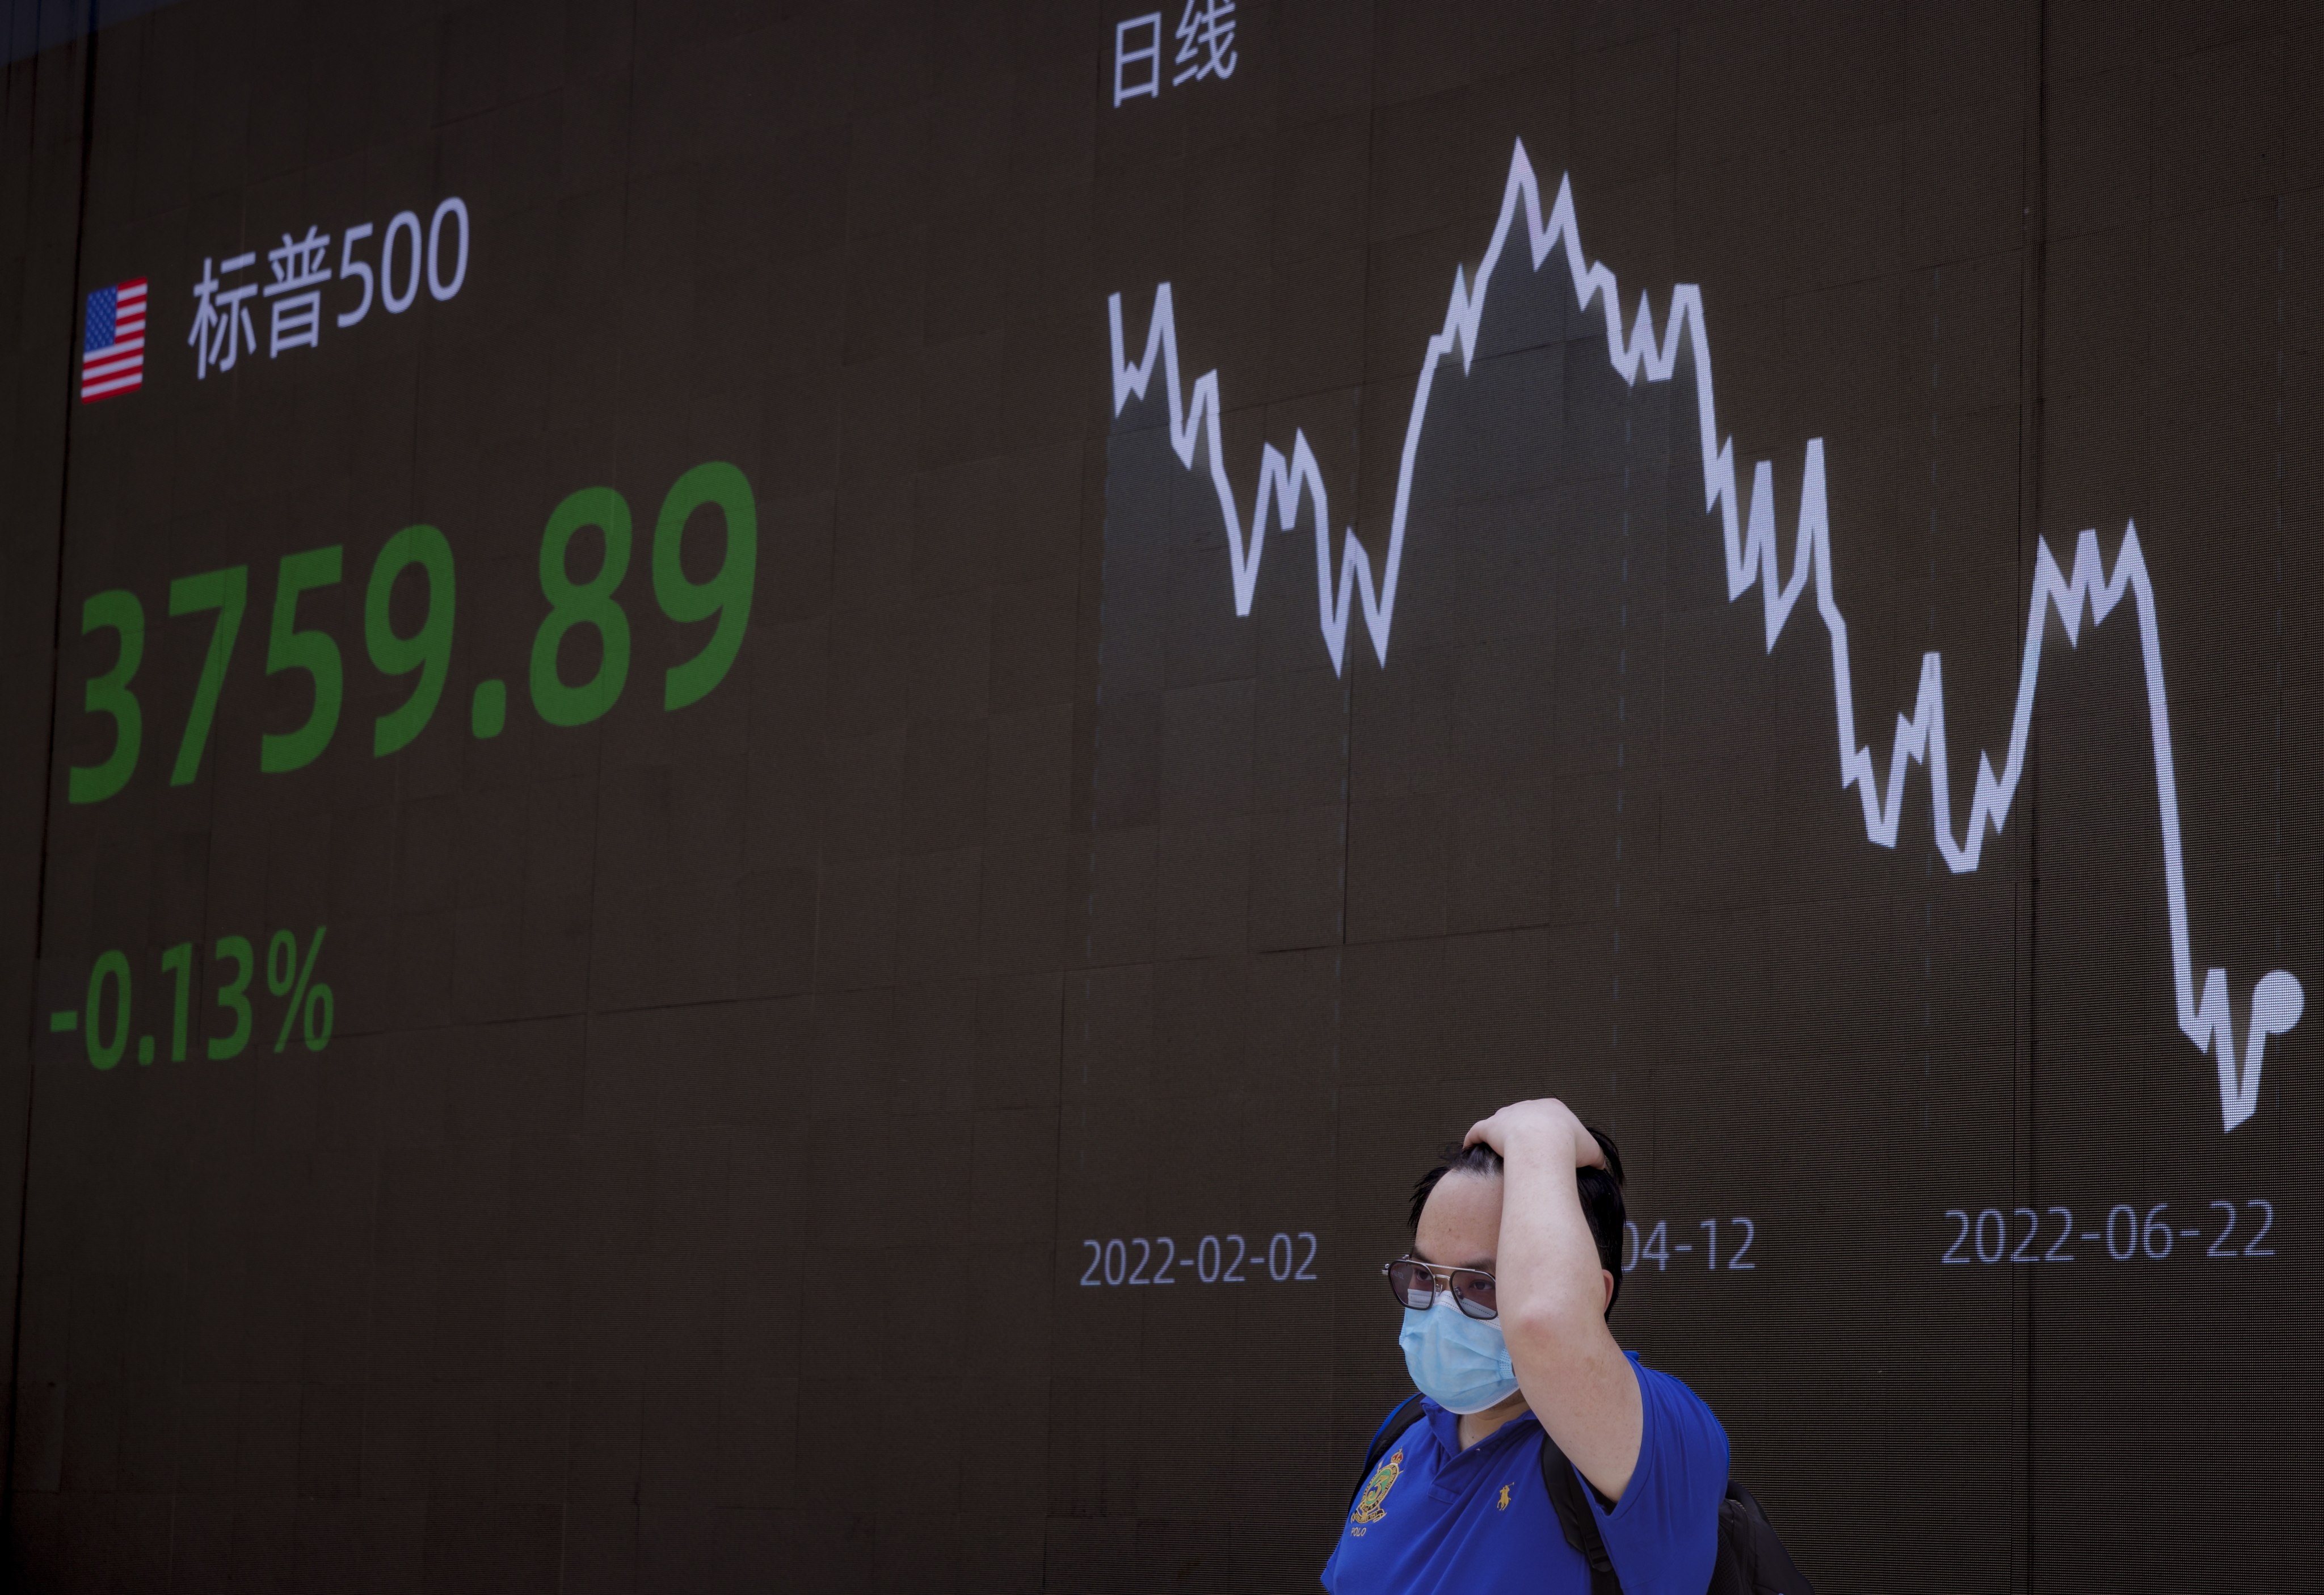 A man stands in front of a large screen showing economic and stock exchange updates in Shanghai on June 23. Photp: EPA-EFE